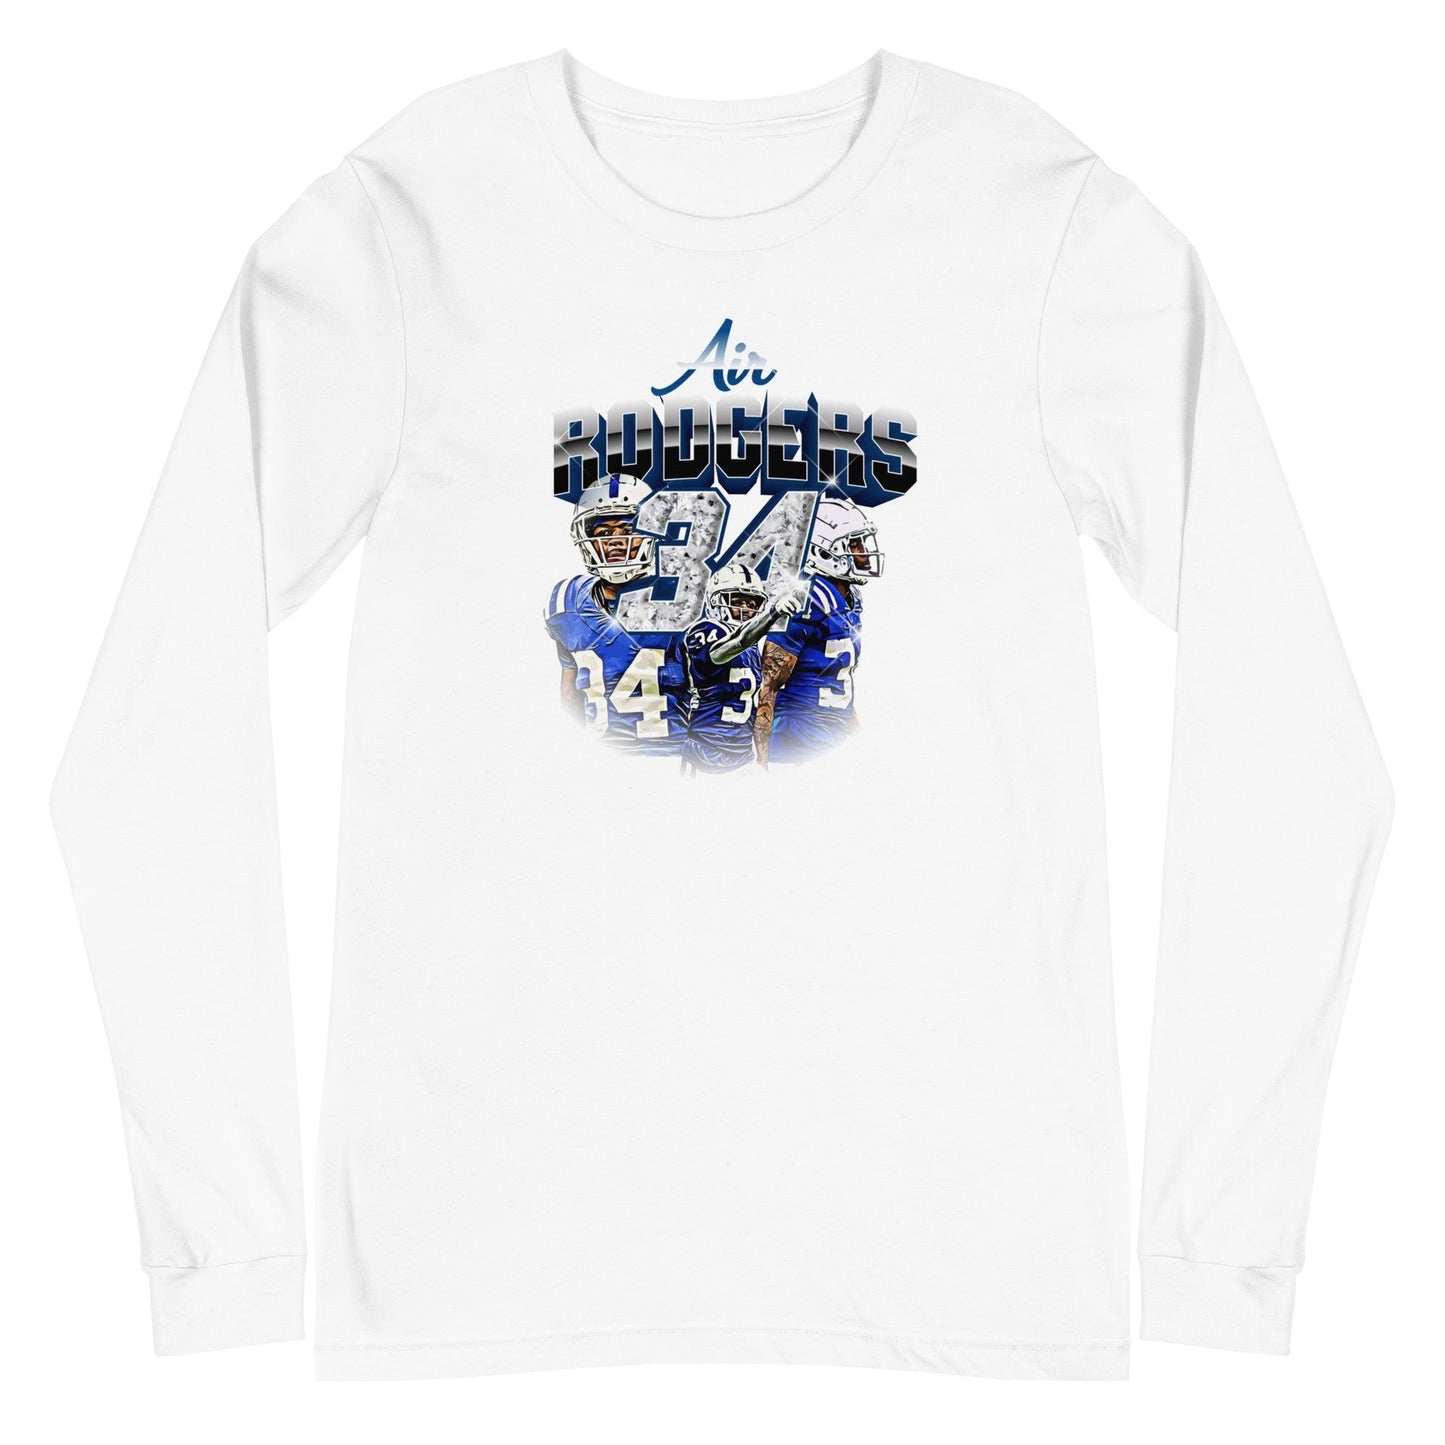 Isaiah Rodgers "Limited Edition" Long Sleeve Tee - Fan Arch